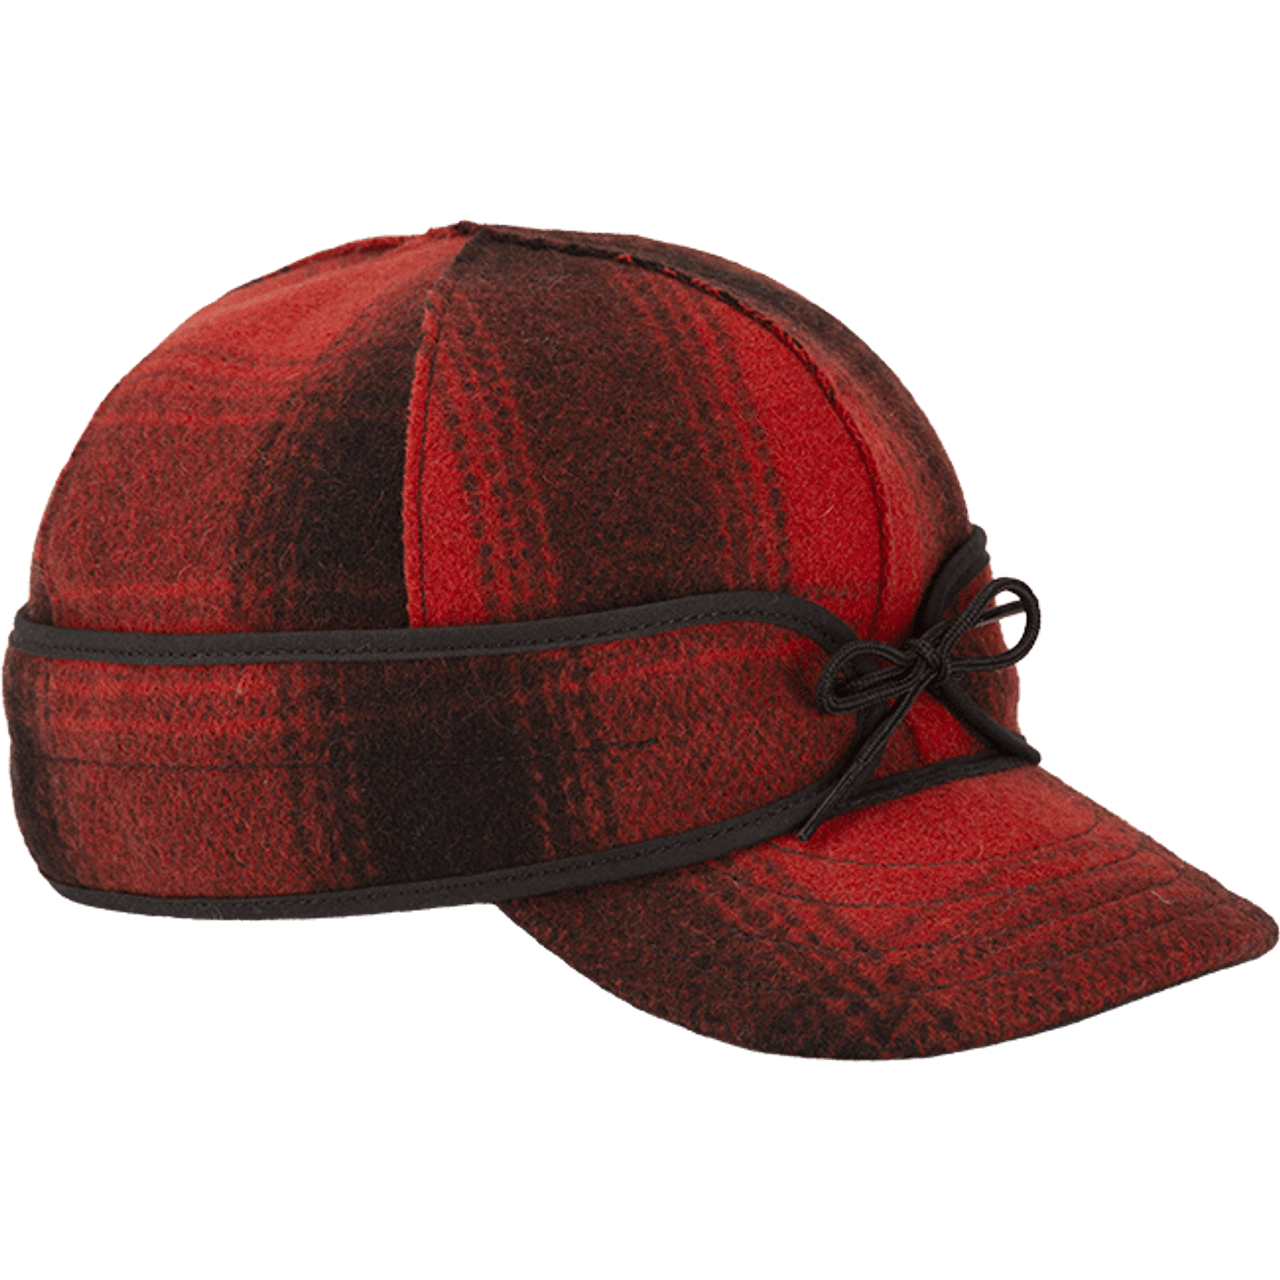 Side View of Stormy Kromer Original Red and black plaid wool hat